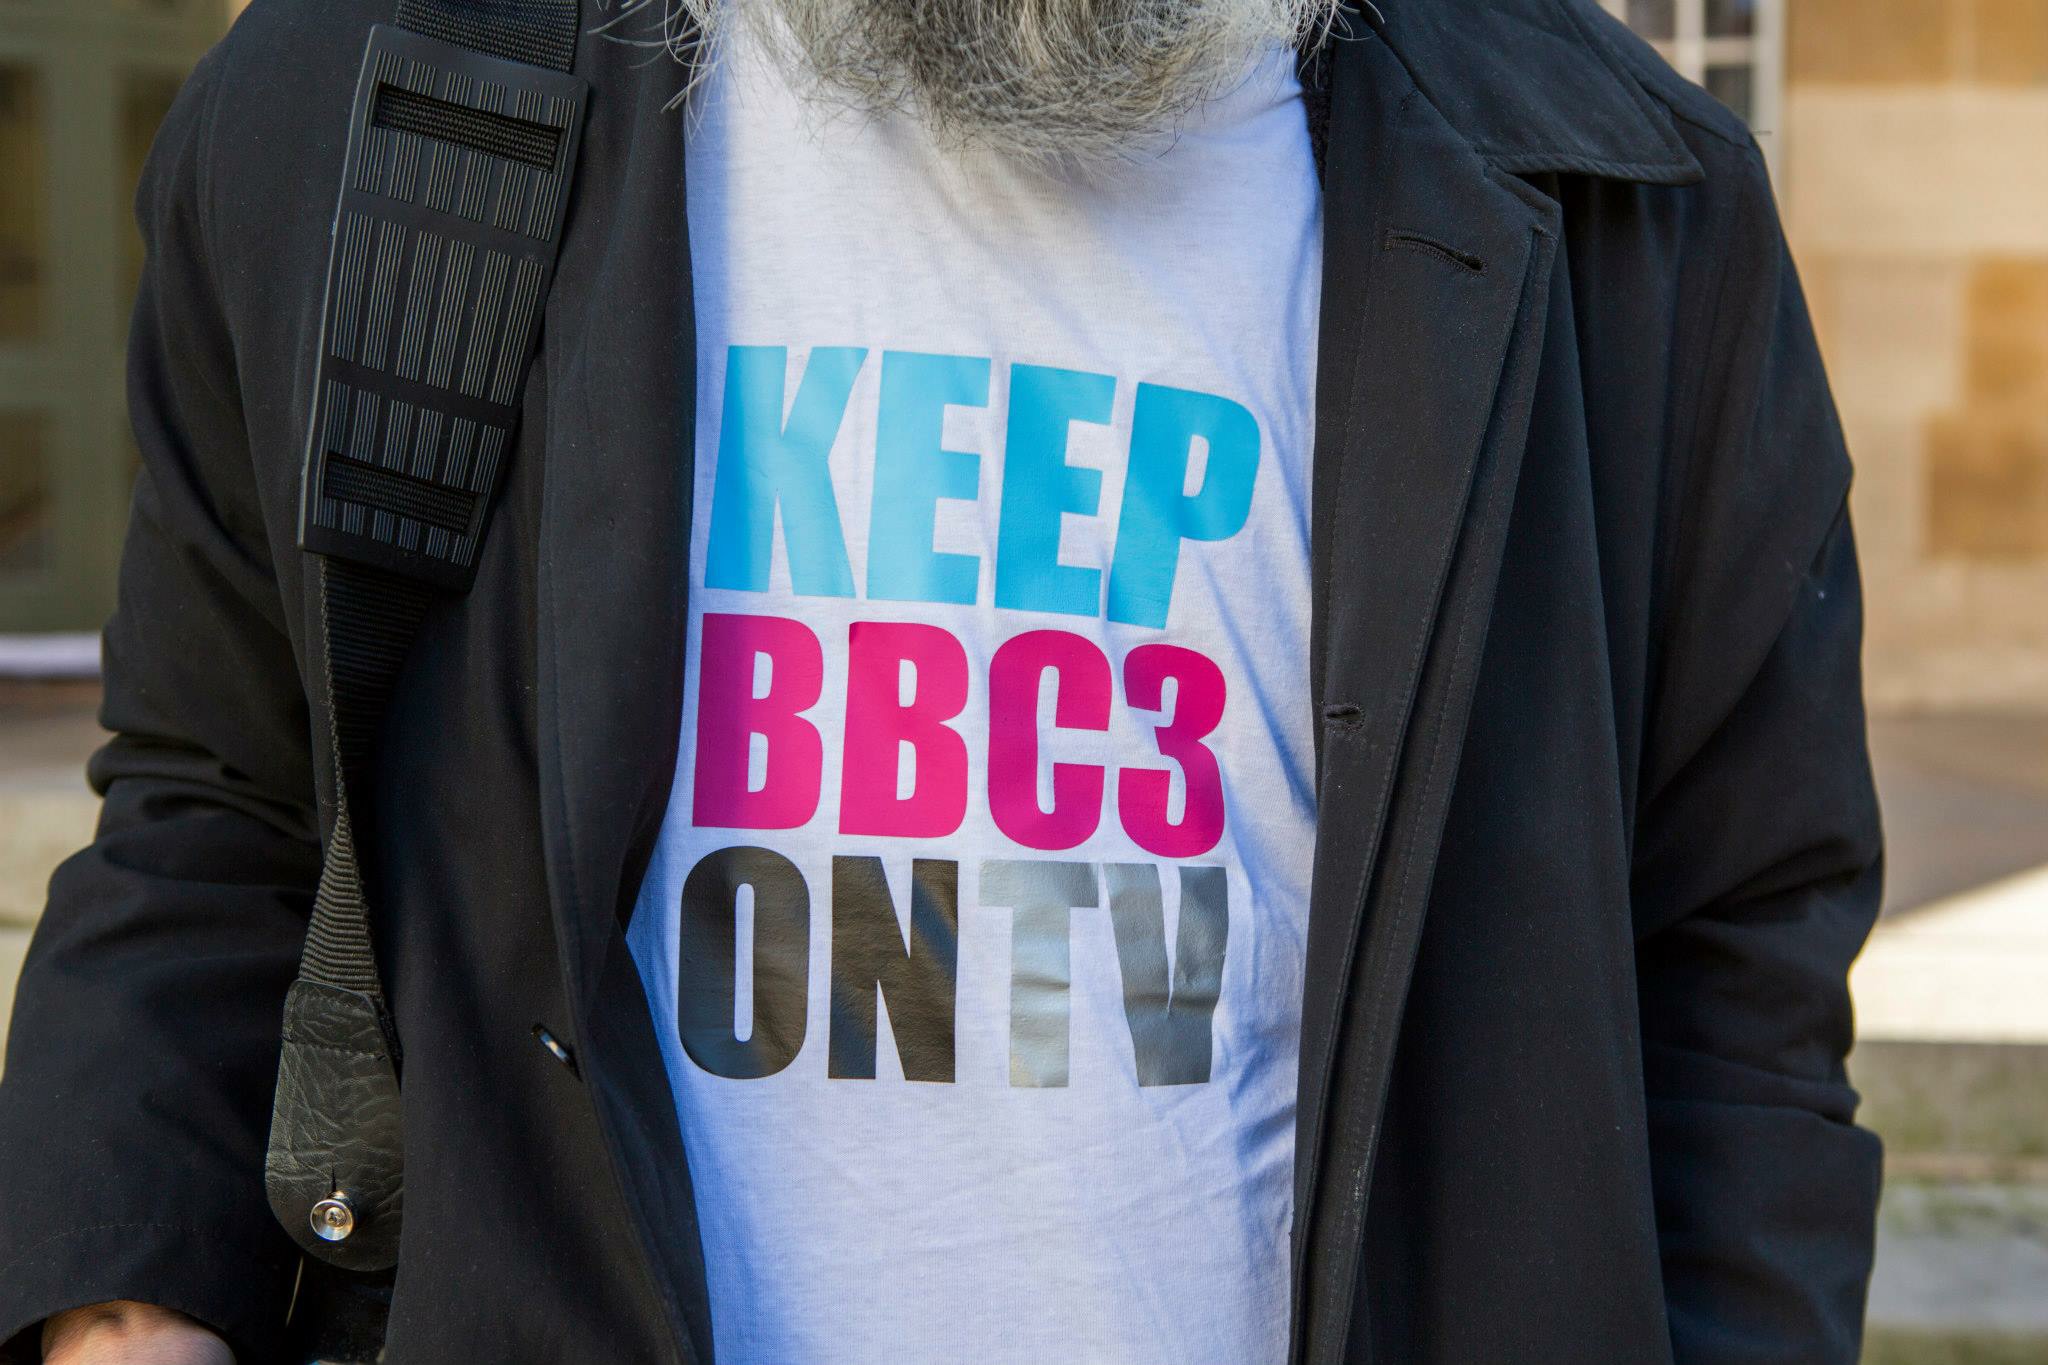 Why we’re fighting to Save BBC Three